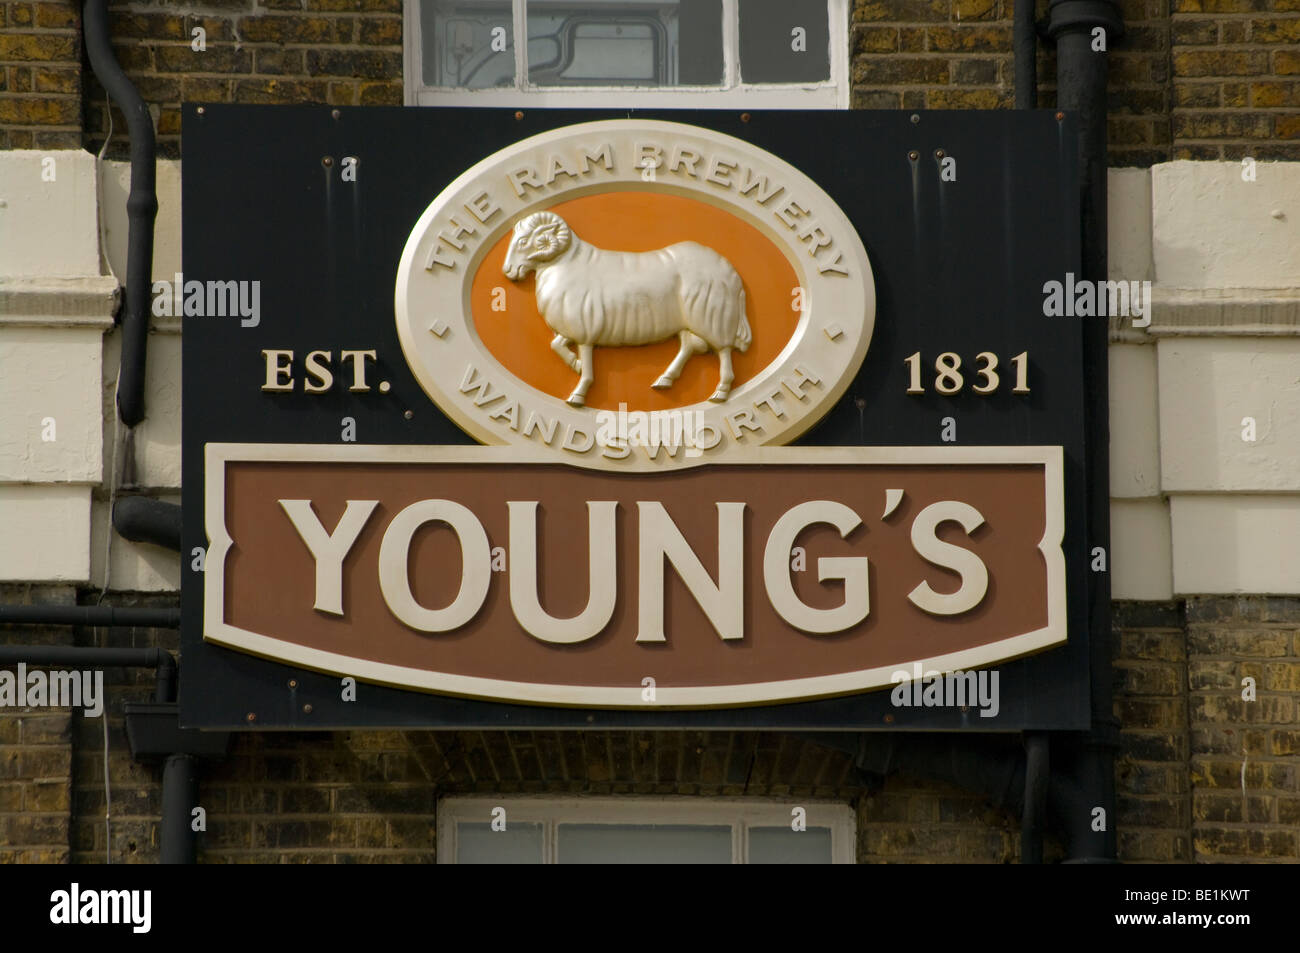 Brasserie Youngs Sign Banque D'Images